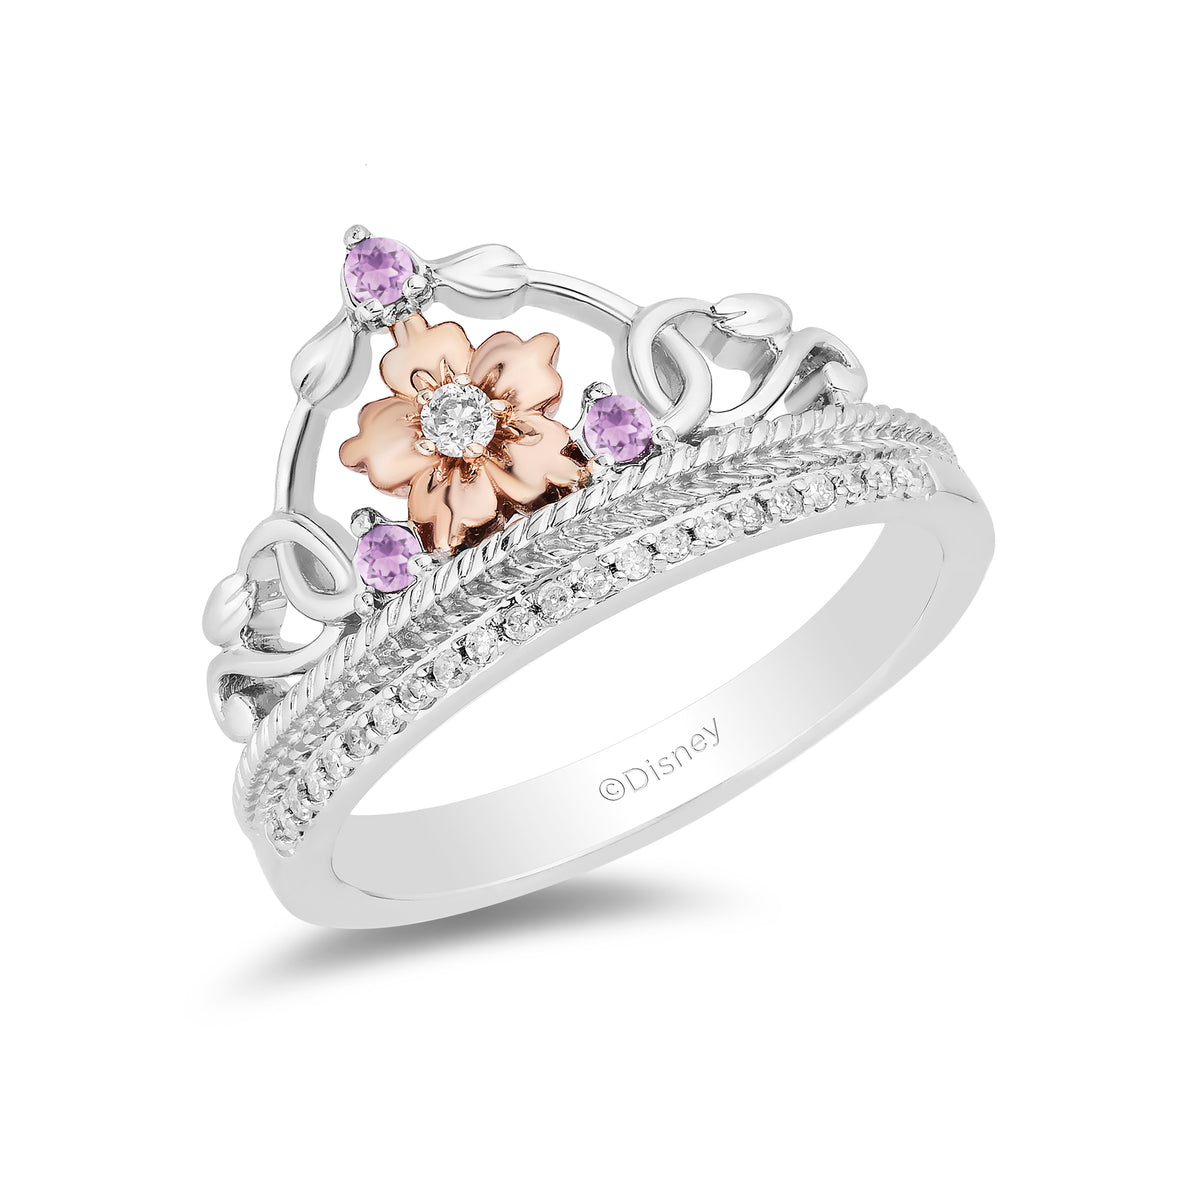 Star Blossom Ring, Pink Gold And Diamonds - Categories